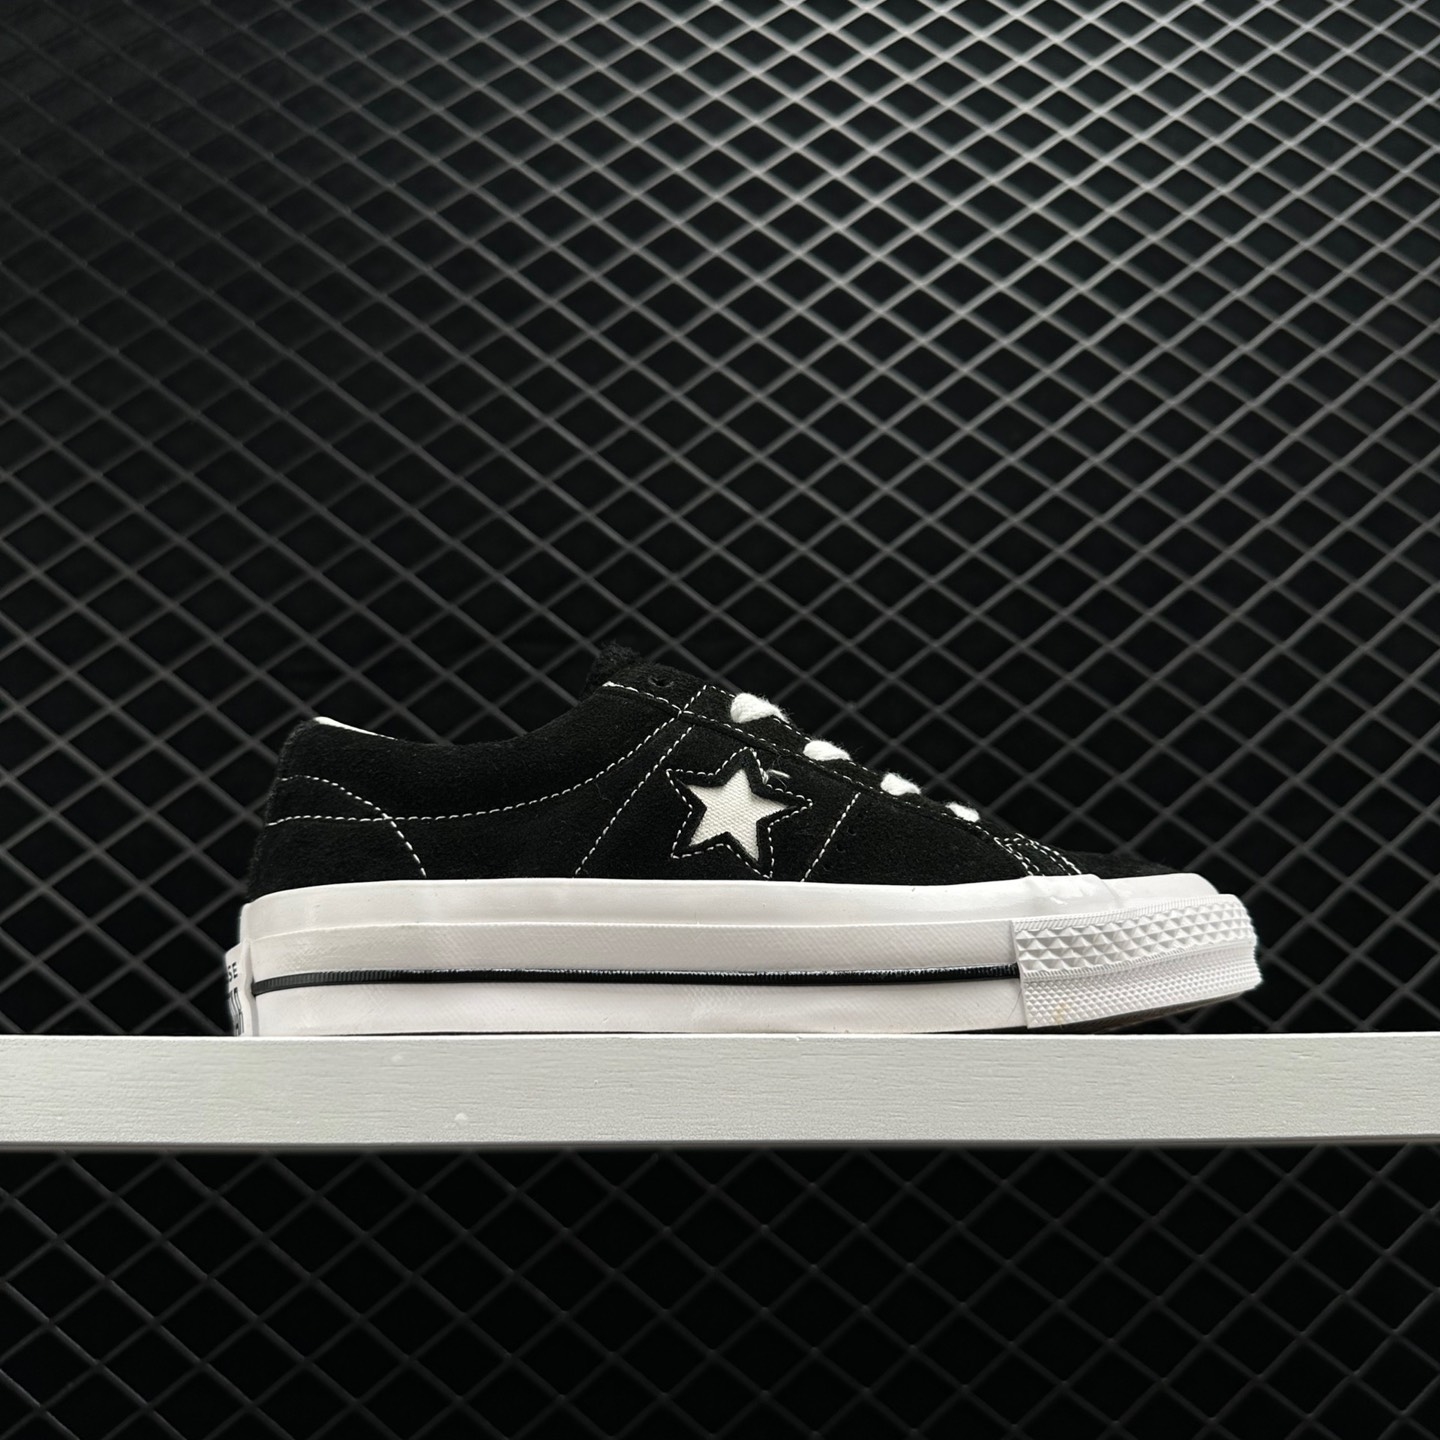 Converse One Star Low PS Black Suede - 361812C | Authentic and Stylish Footwear